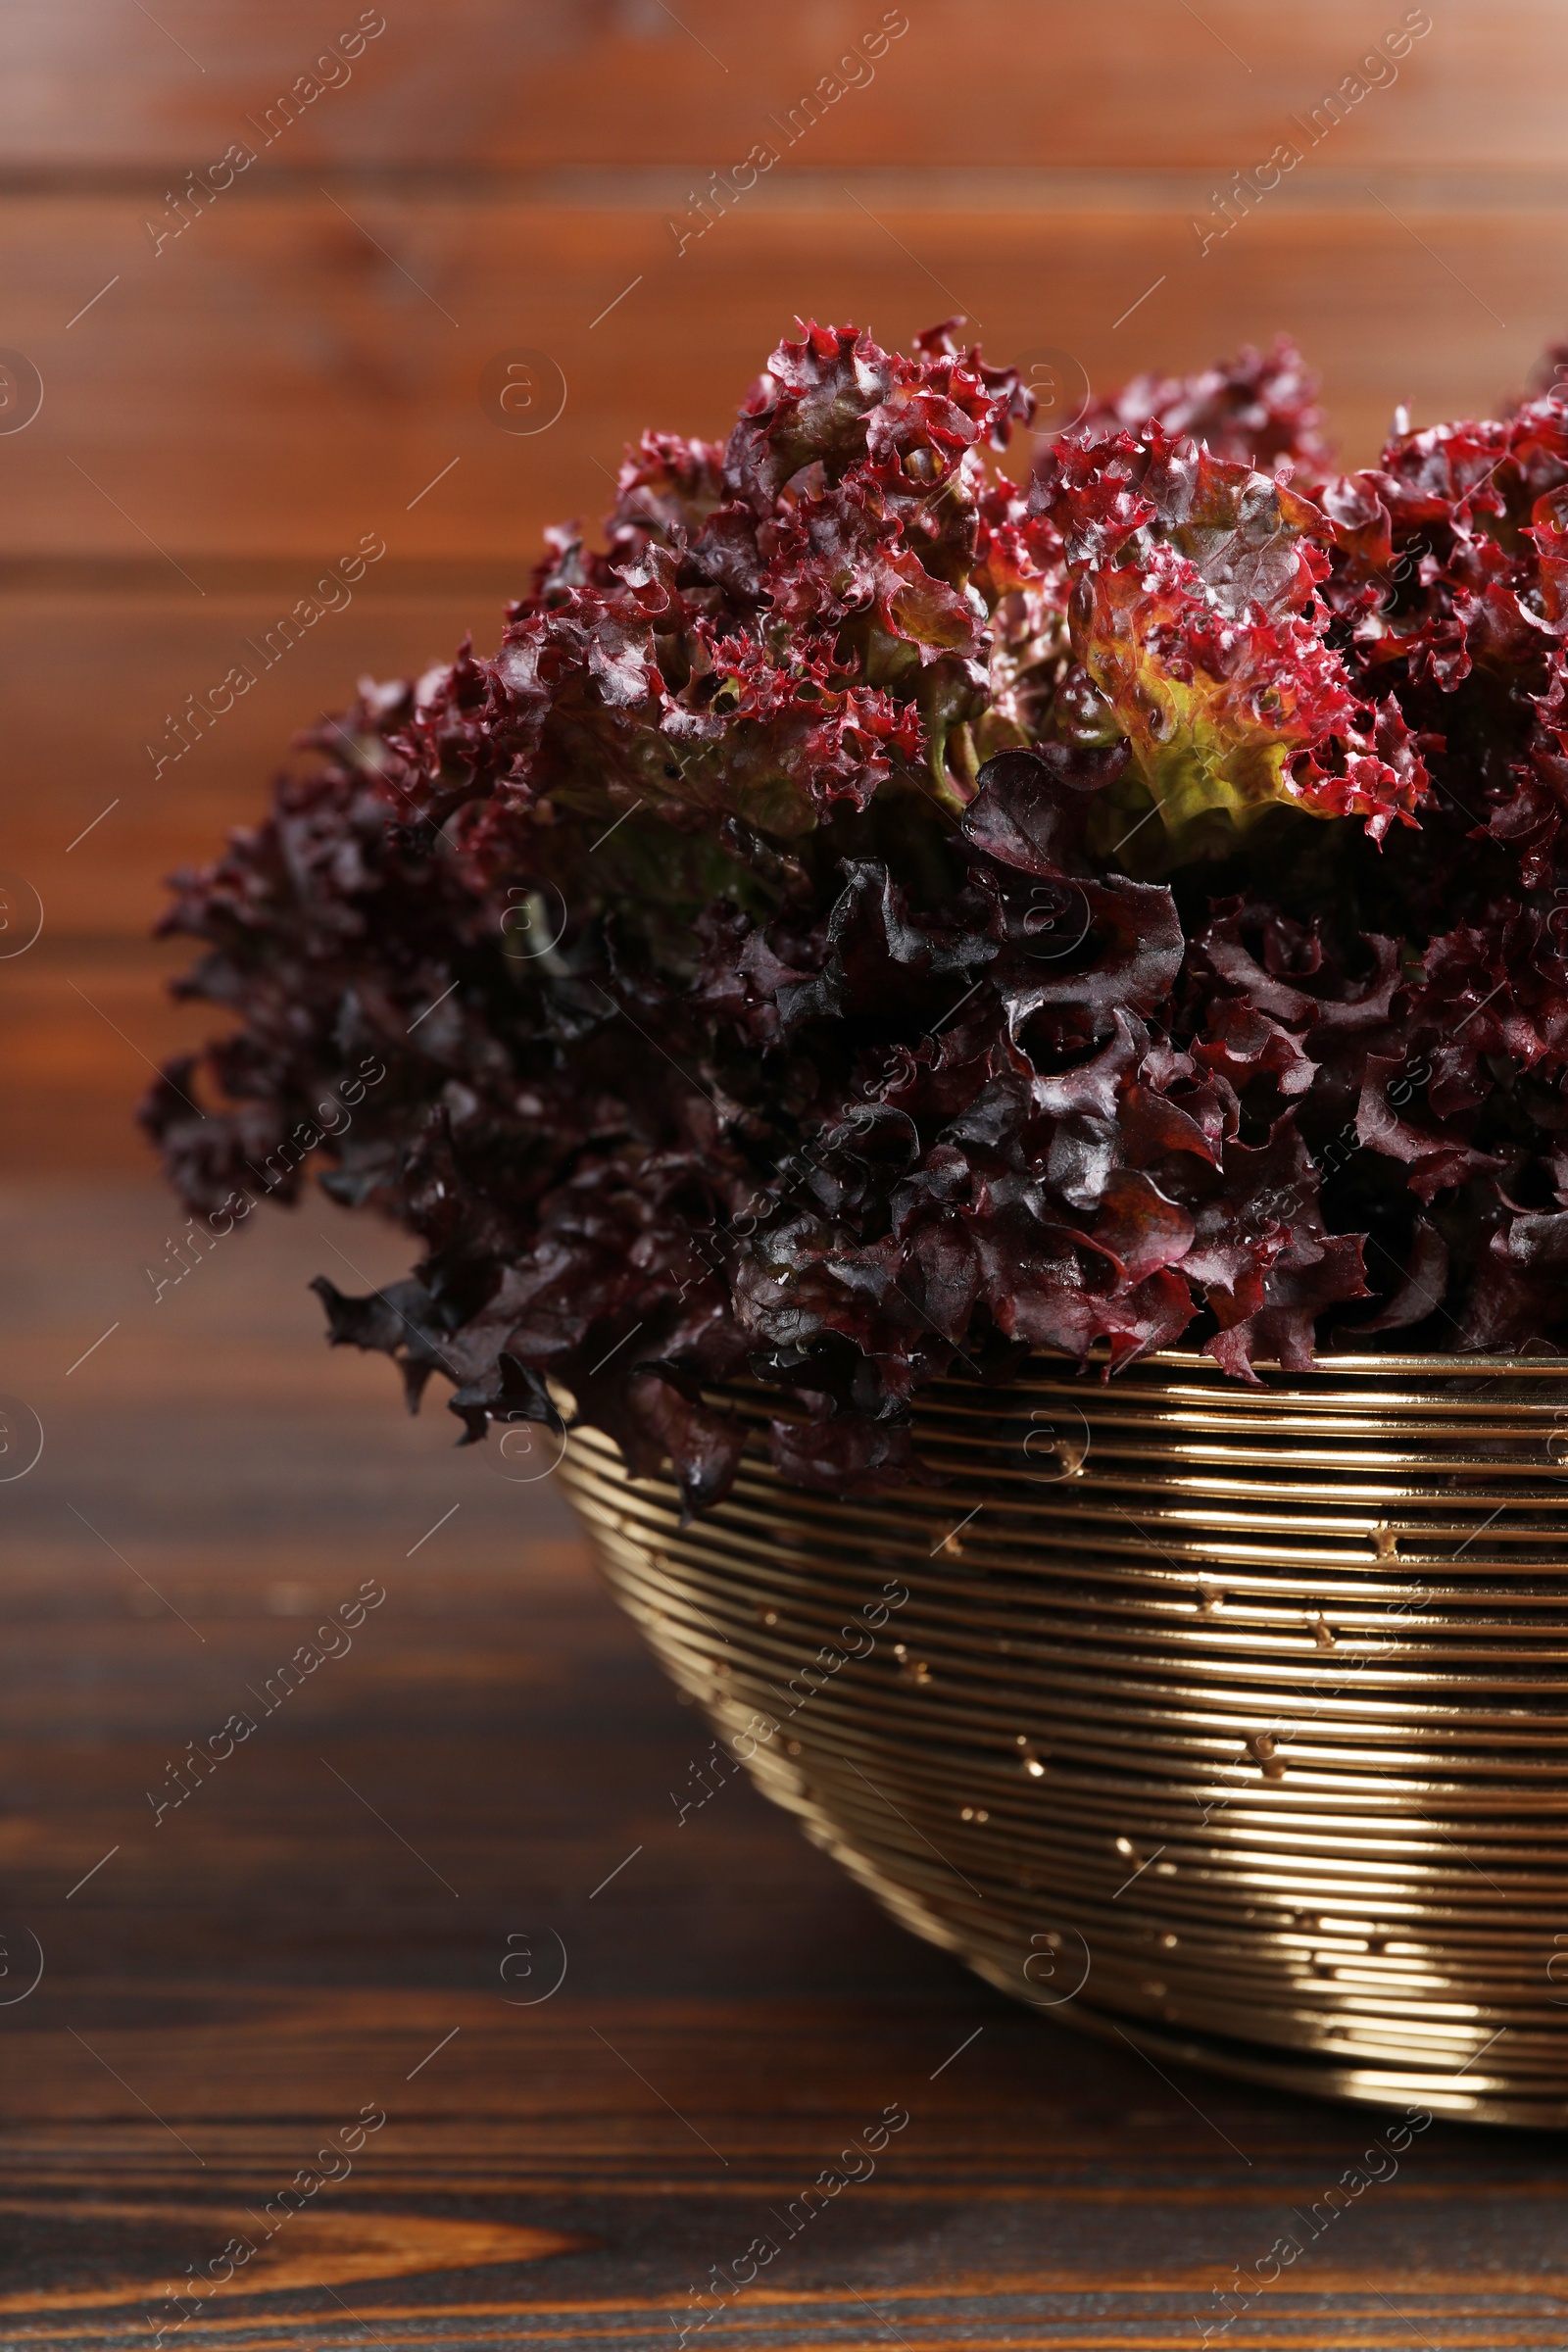 Photo of Bowl with fresh red coral lettuce on wooden table